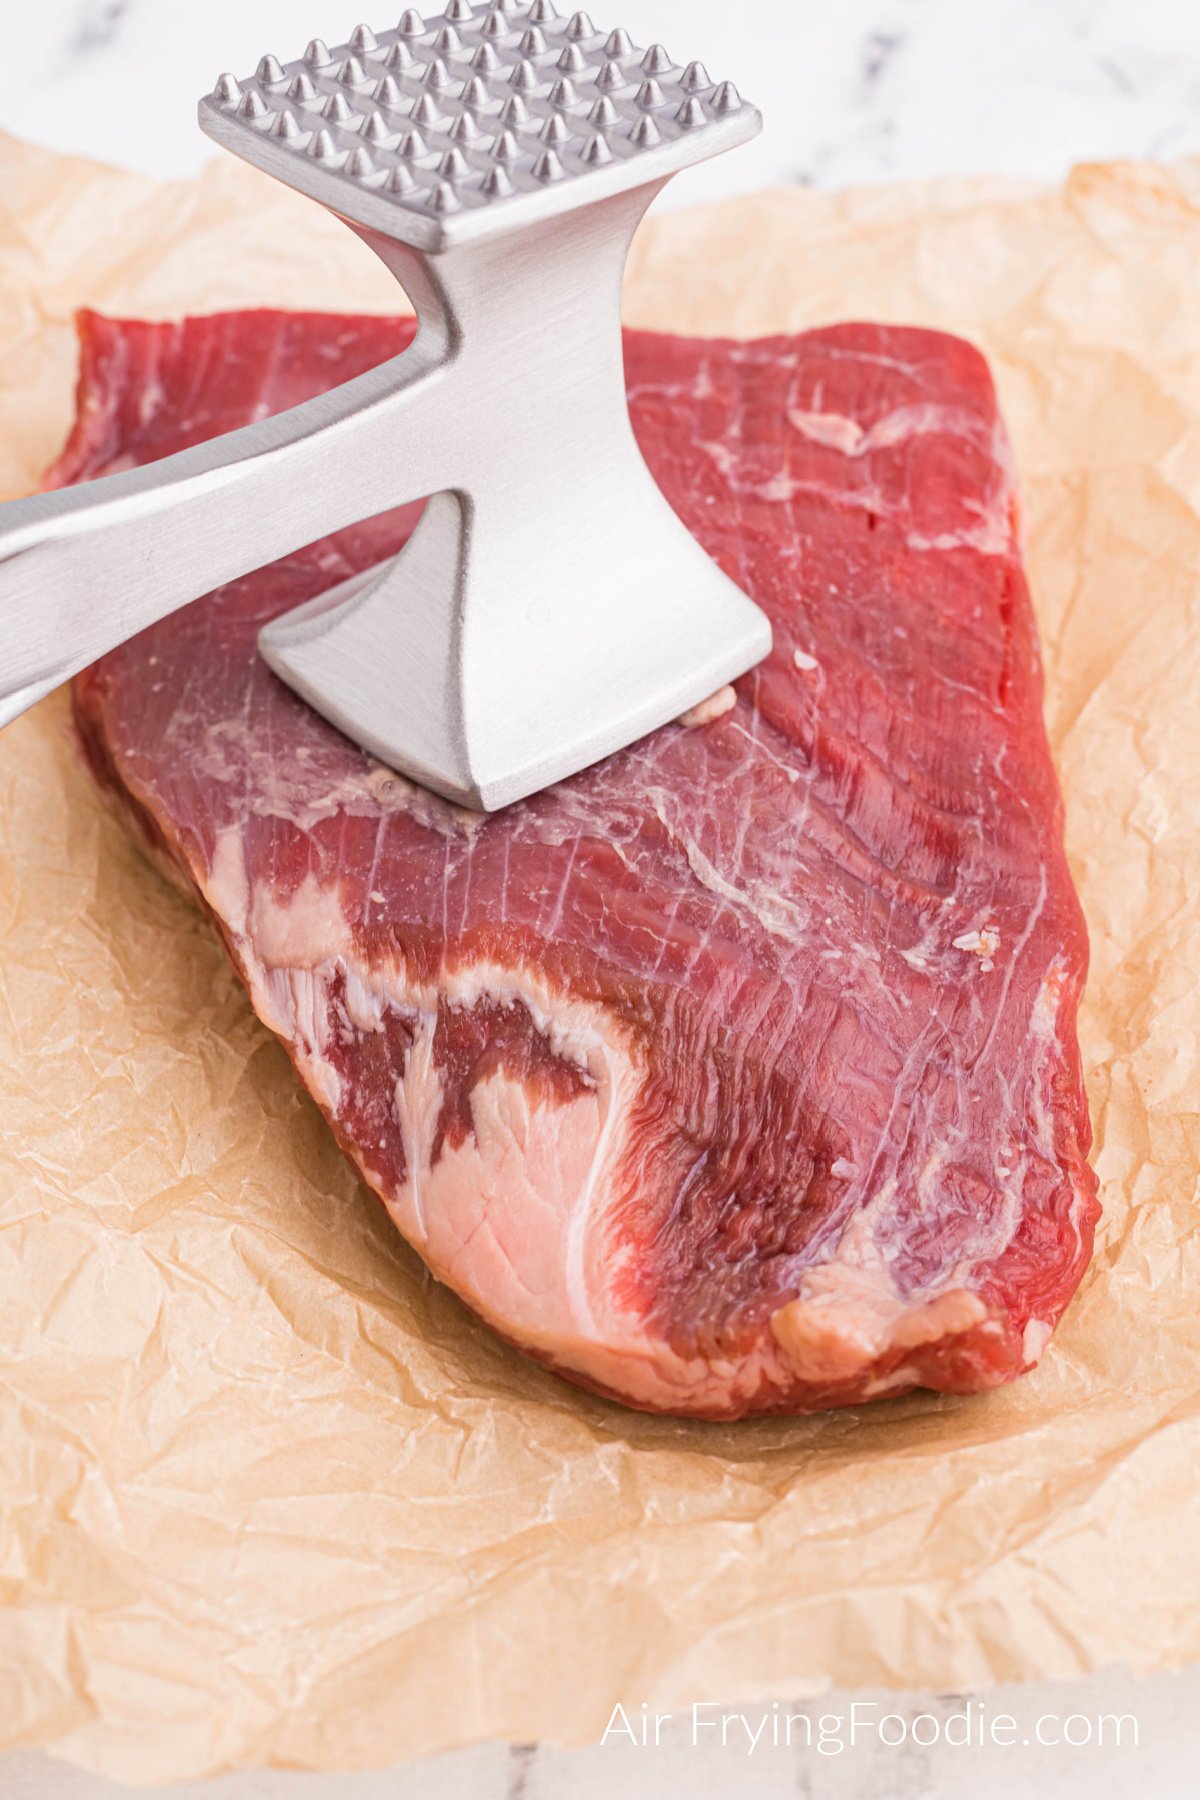 Steak being tenderized with a meat mallet.